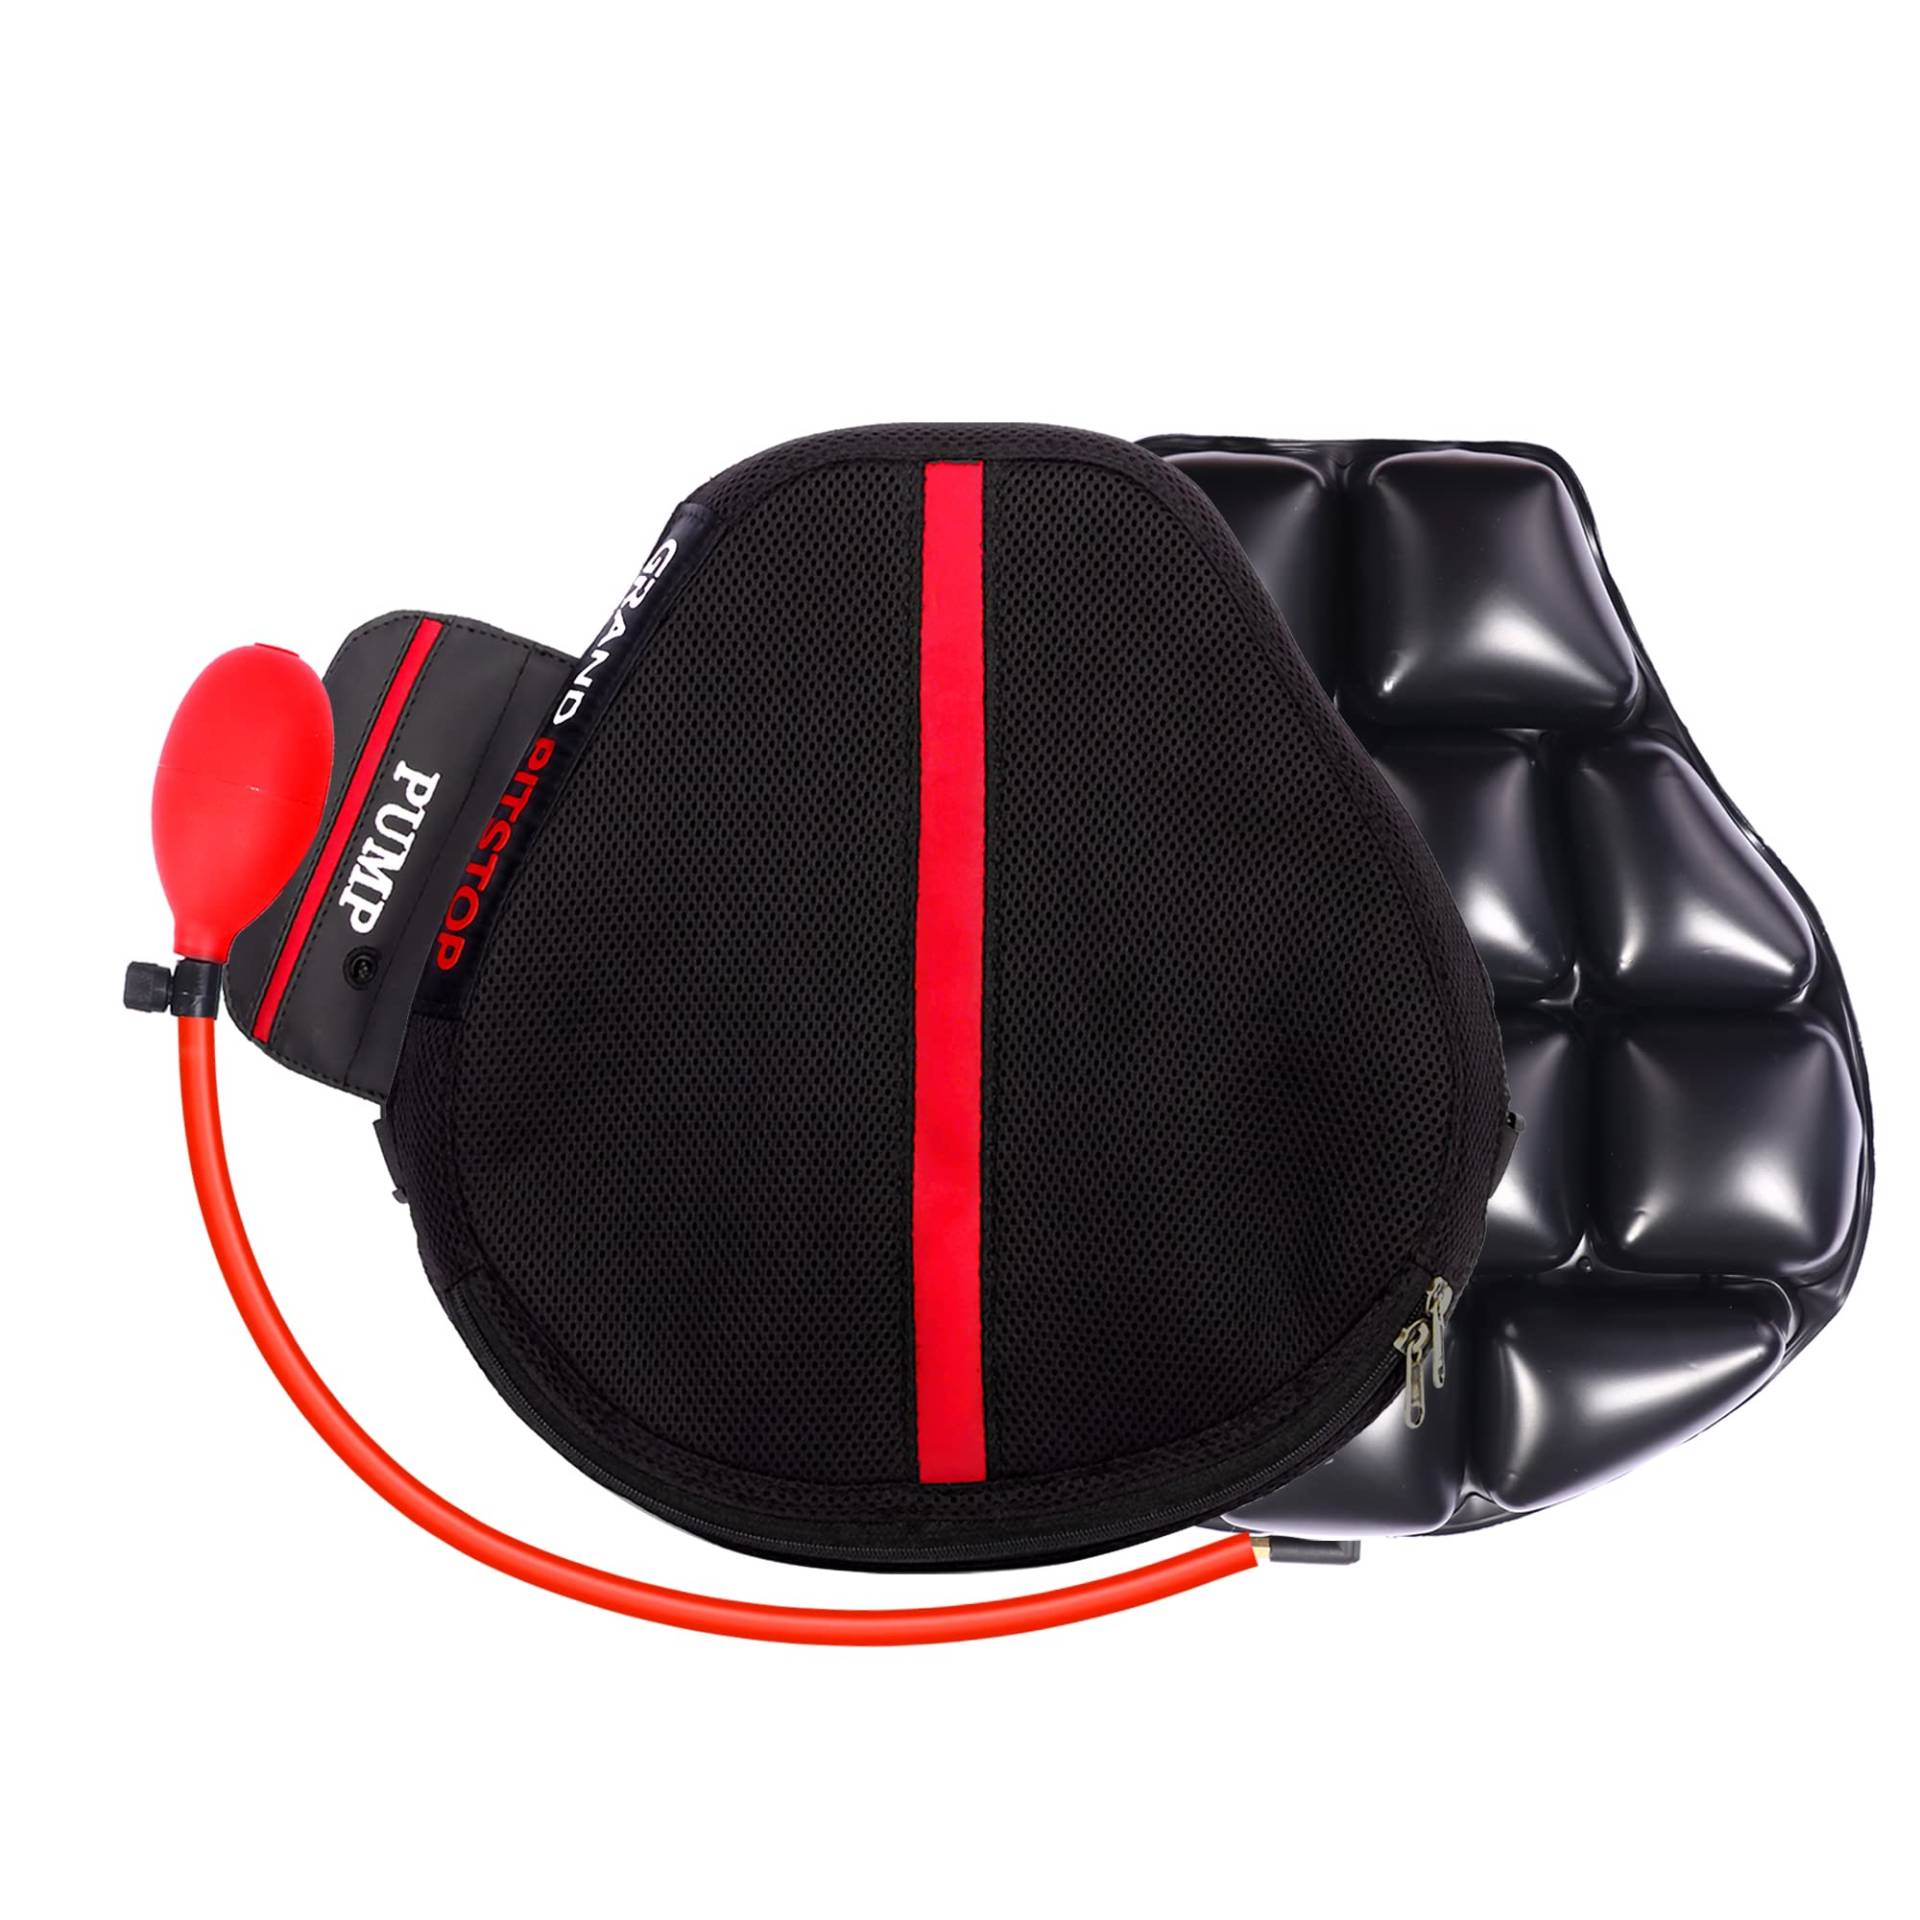 GRAND PITSTOP Motorcycle Air Seat Cushion, on The go inflate & Deflate, Pressure Relief Motorcycle Seat Pad, Shock Proof Comfortable for Motorbike Long Rides (Cruiser Premium with Air Pump) von GRAND PITSTOP